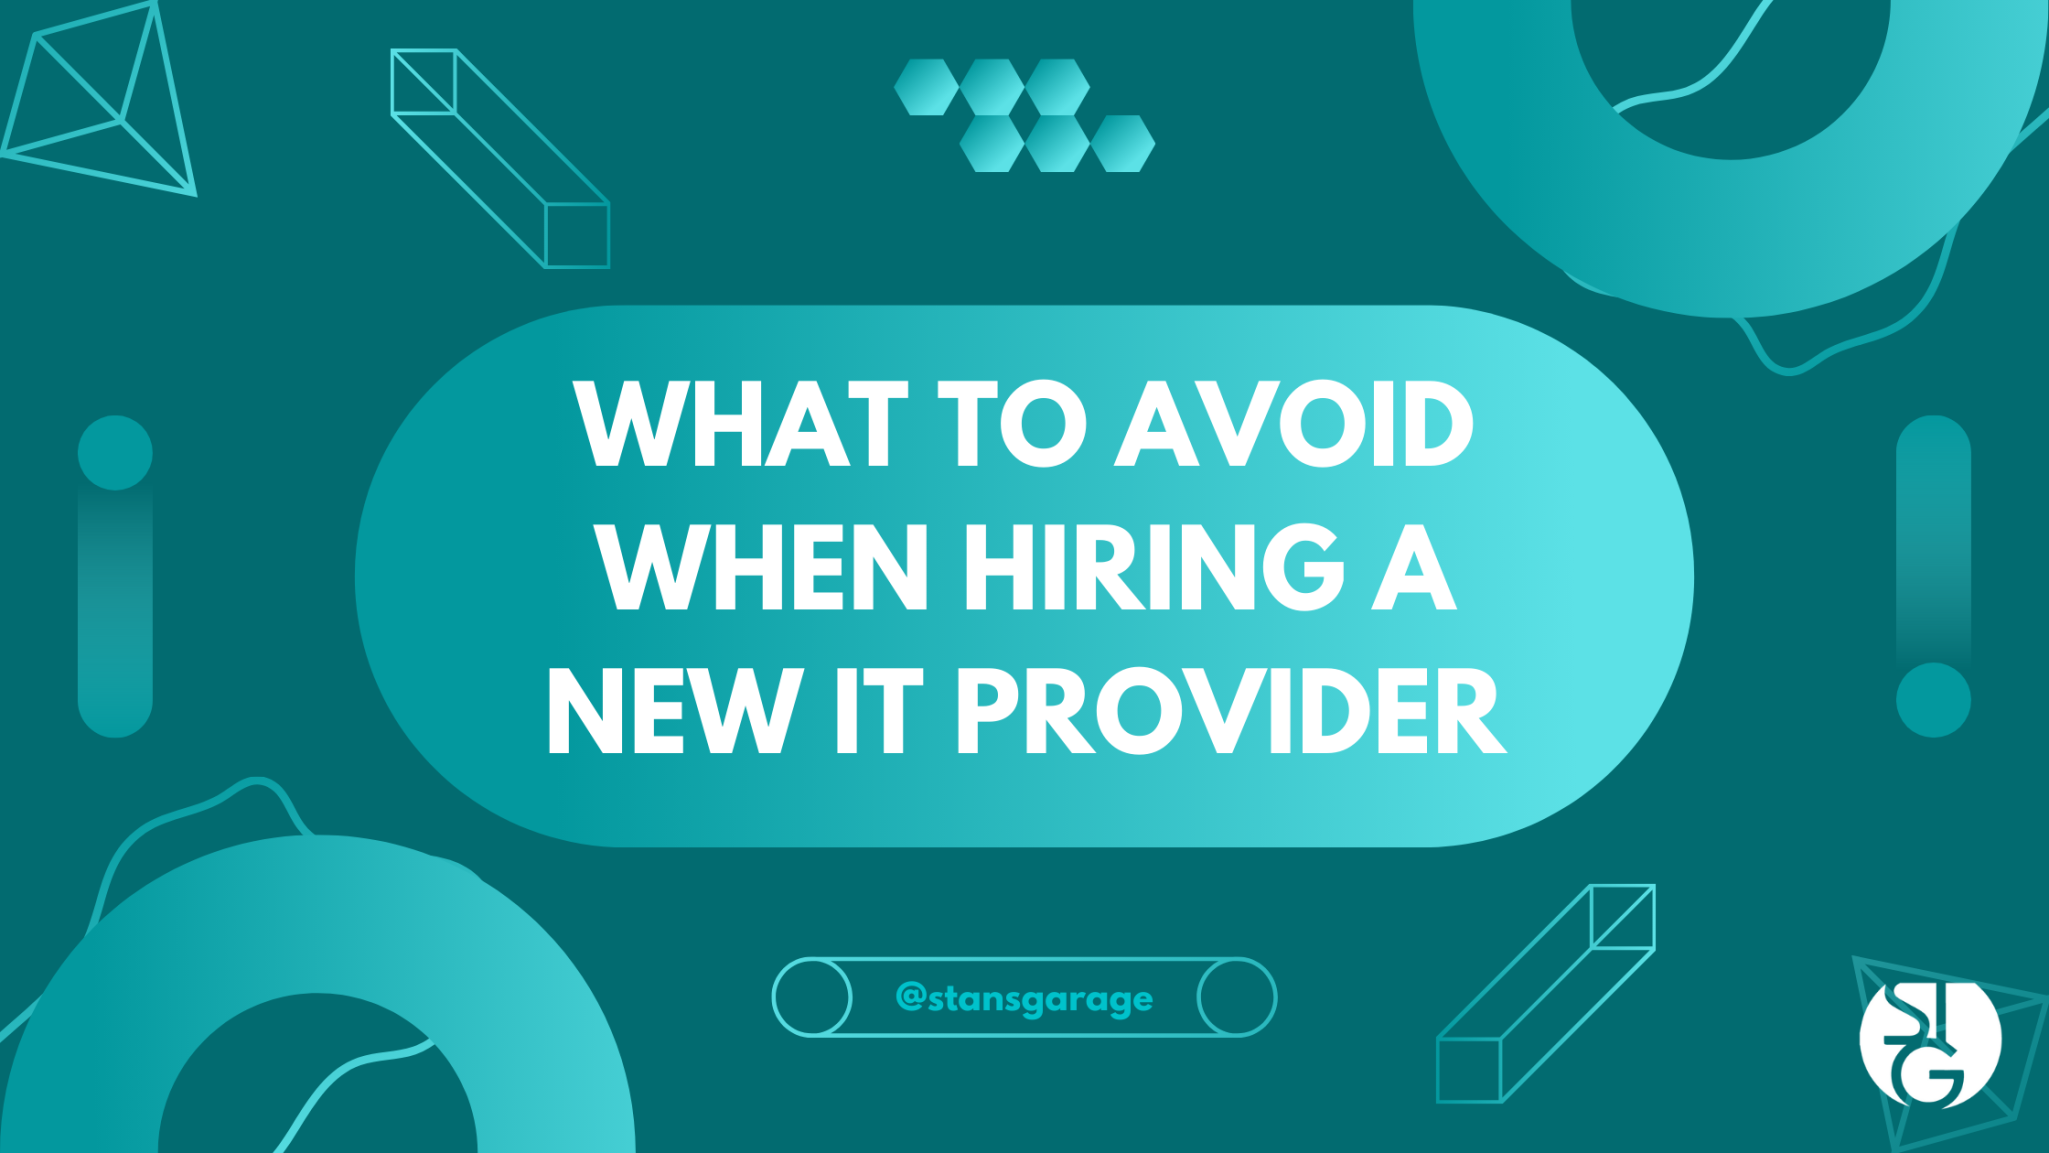 What to Avoid When Hiring a New IT Provider